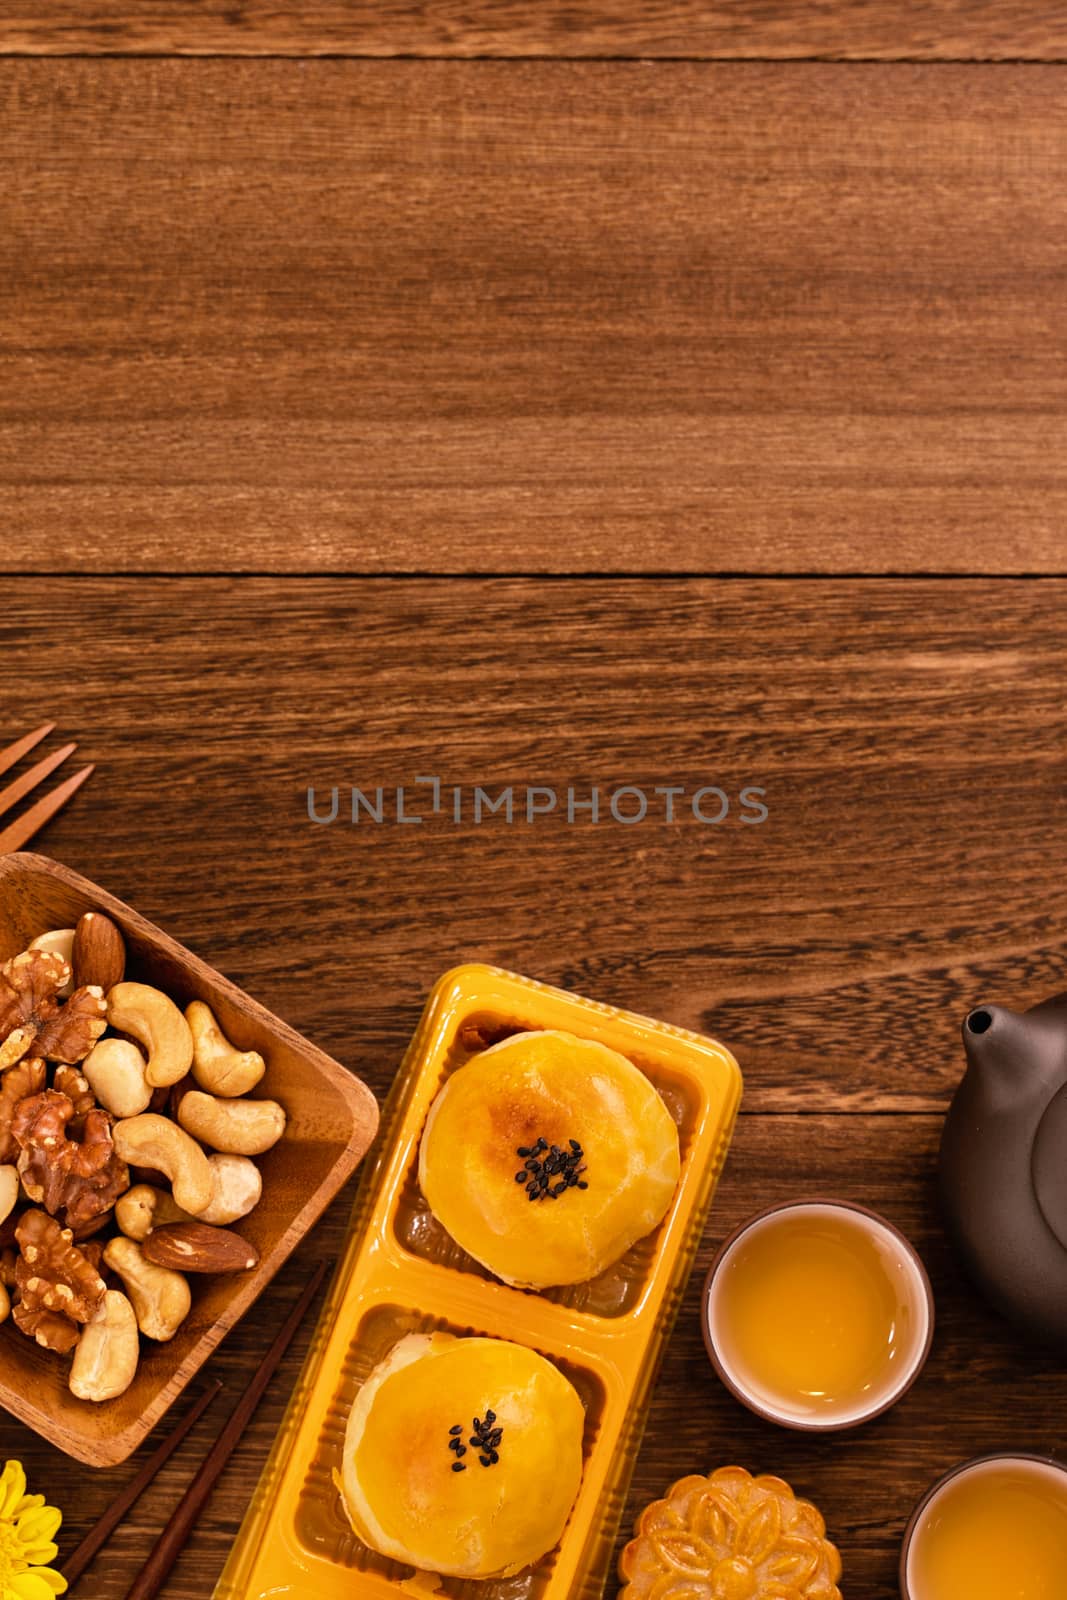 Moon cake for Mid-Autumn Festival, delicious beautiful fresh moo by ROMIXIMAGE